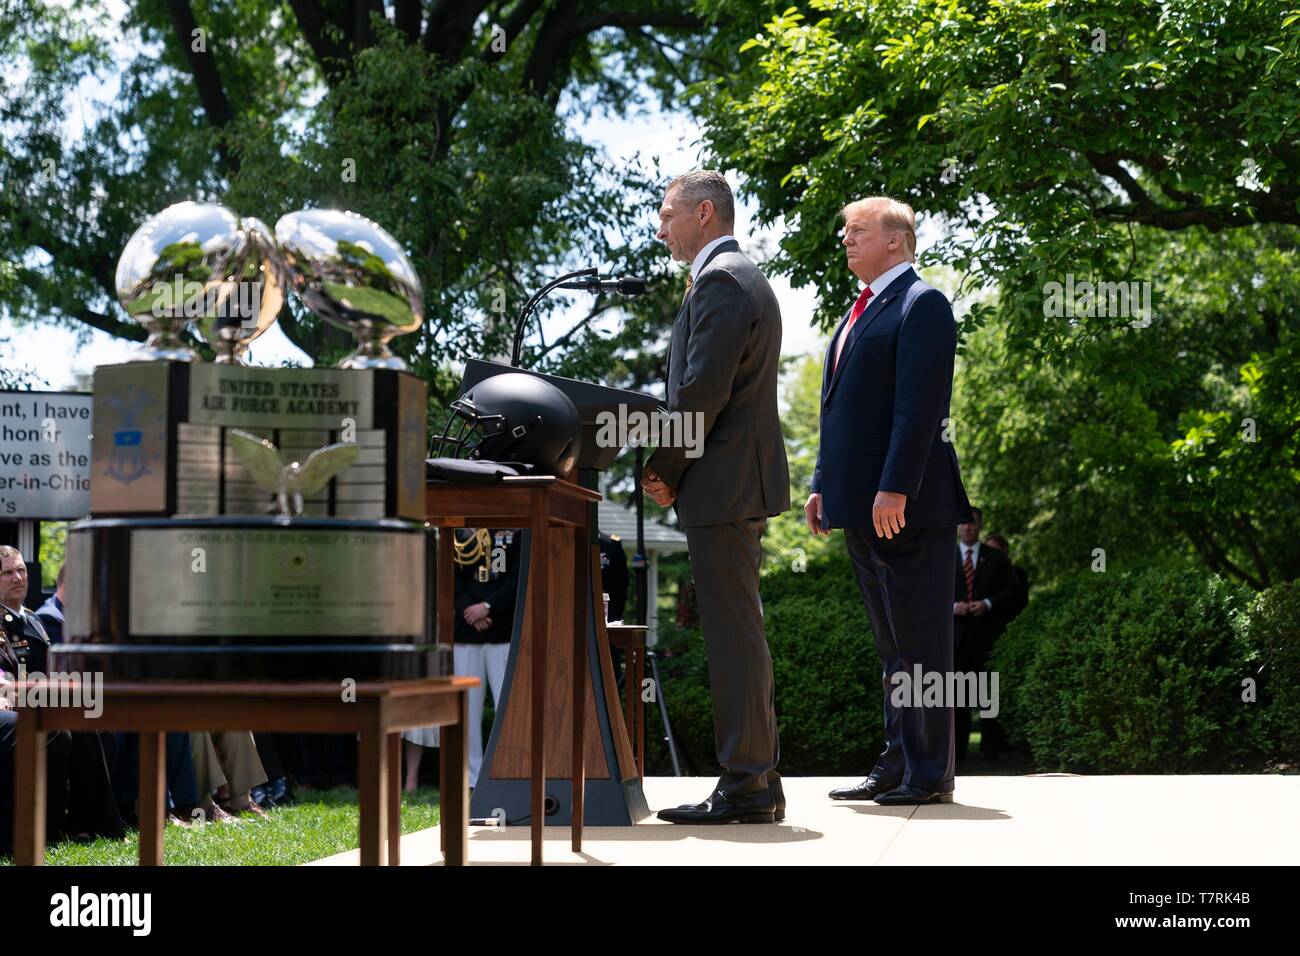 U.S President Donald Trump listens as football coach Jeff Monken delivers remarks during the Commander in Chiefs trophy presentation at the Rose Garden of the White House May 6, 2019 in Washington, DC. The Army Black Knights of the U.S. Military Academy football team are the 2018 champions. Stock Photo